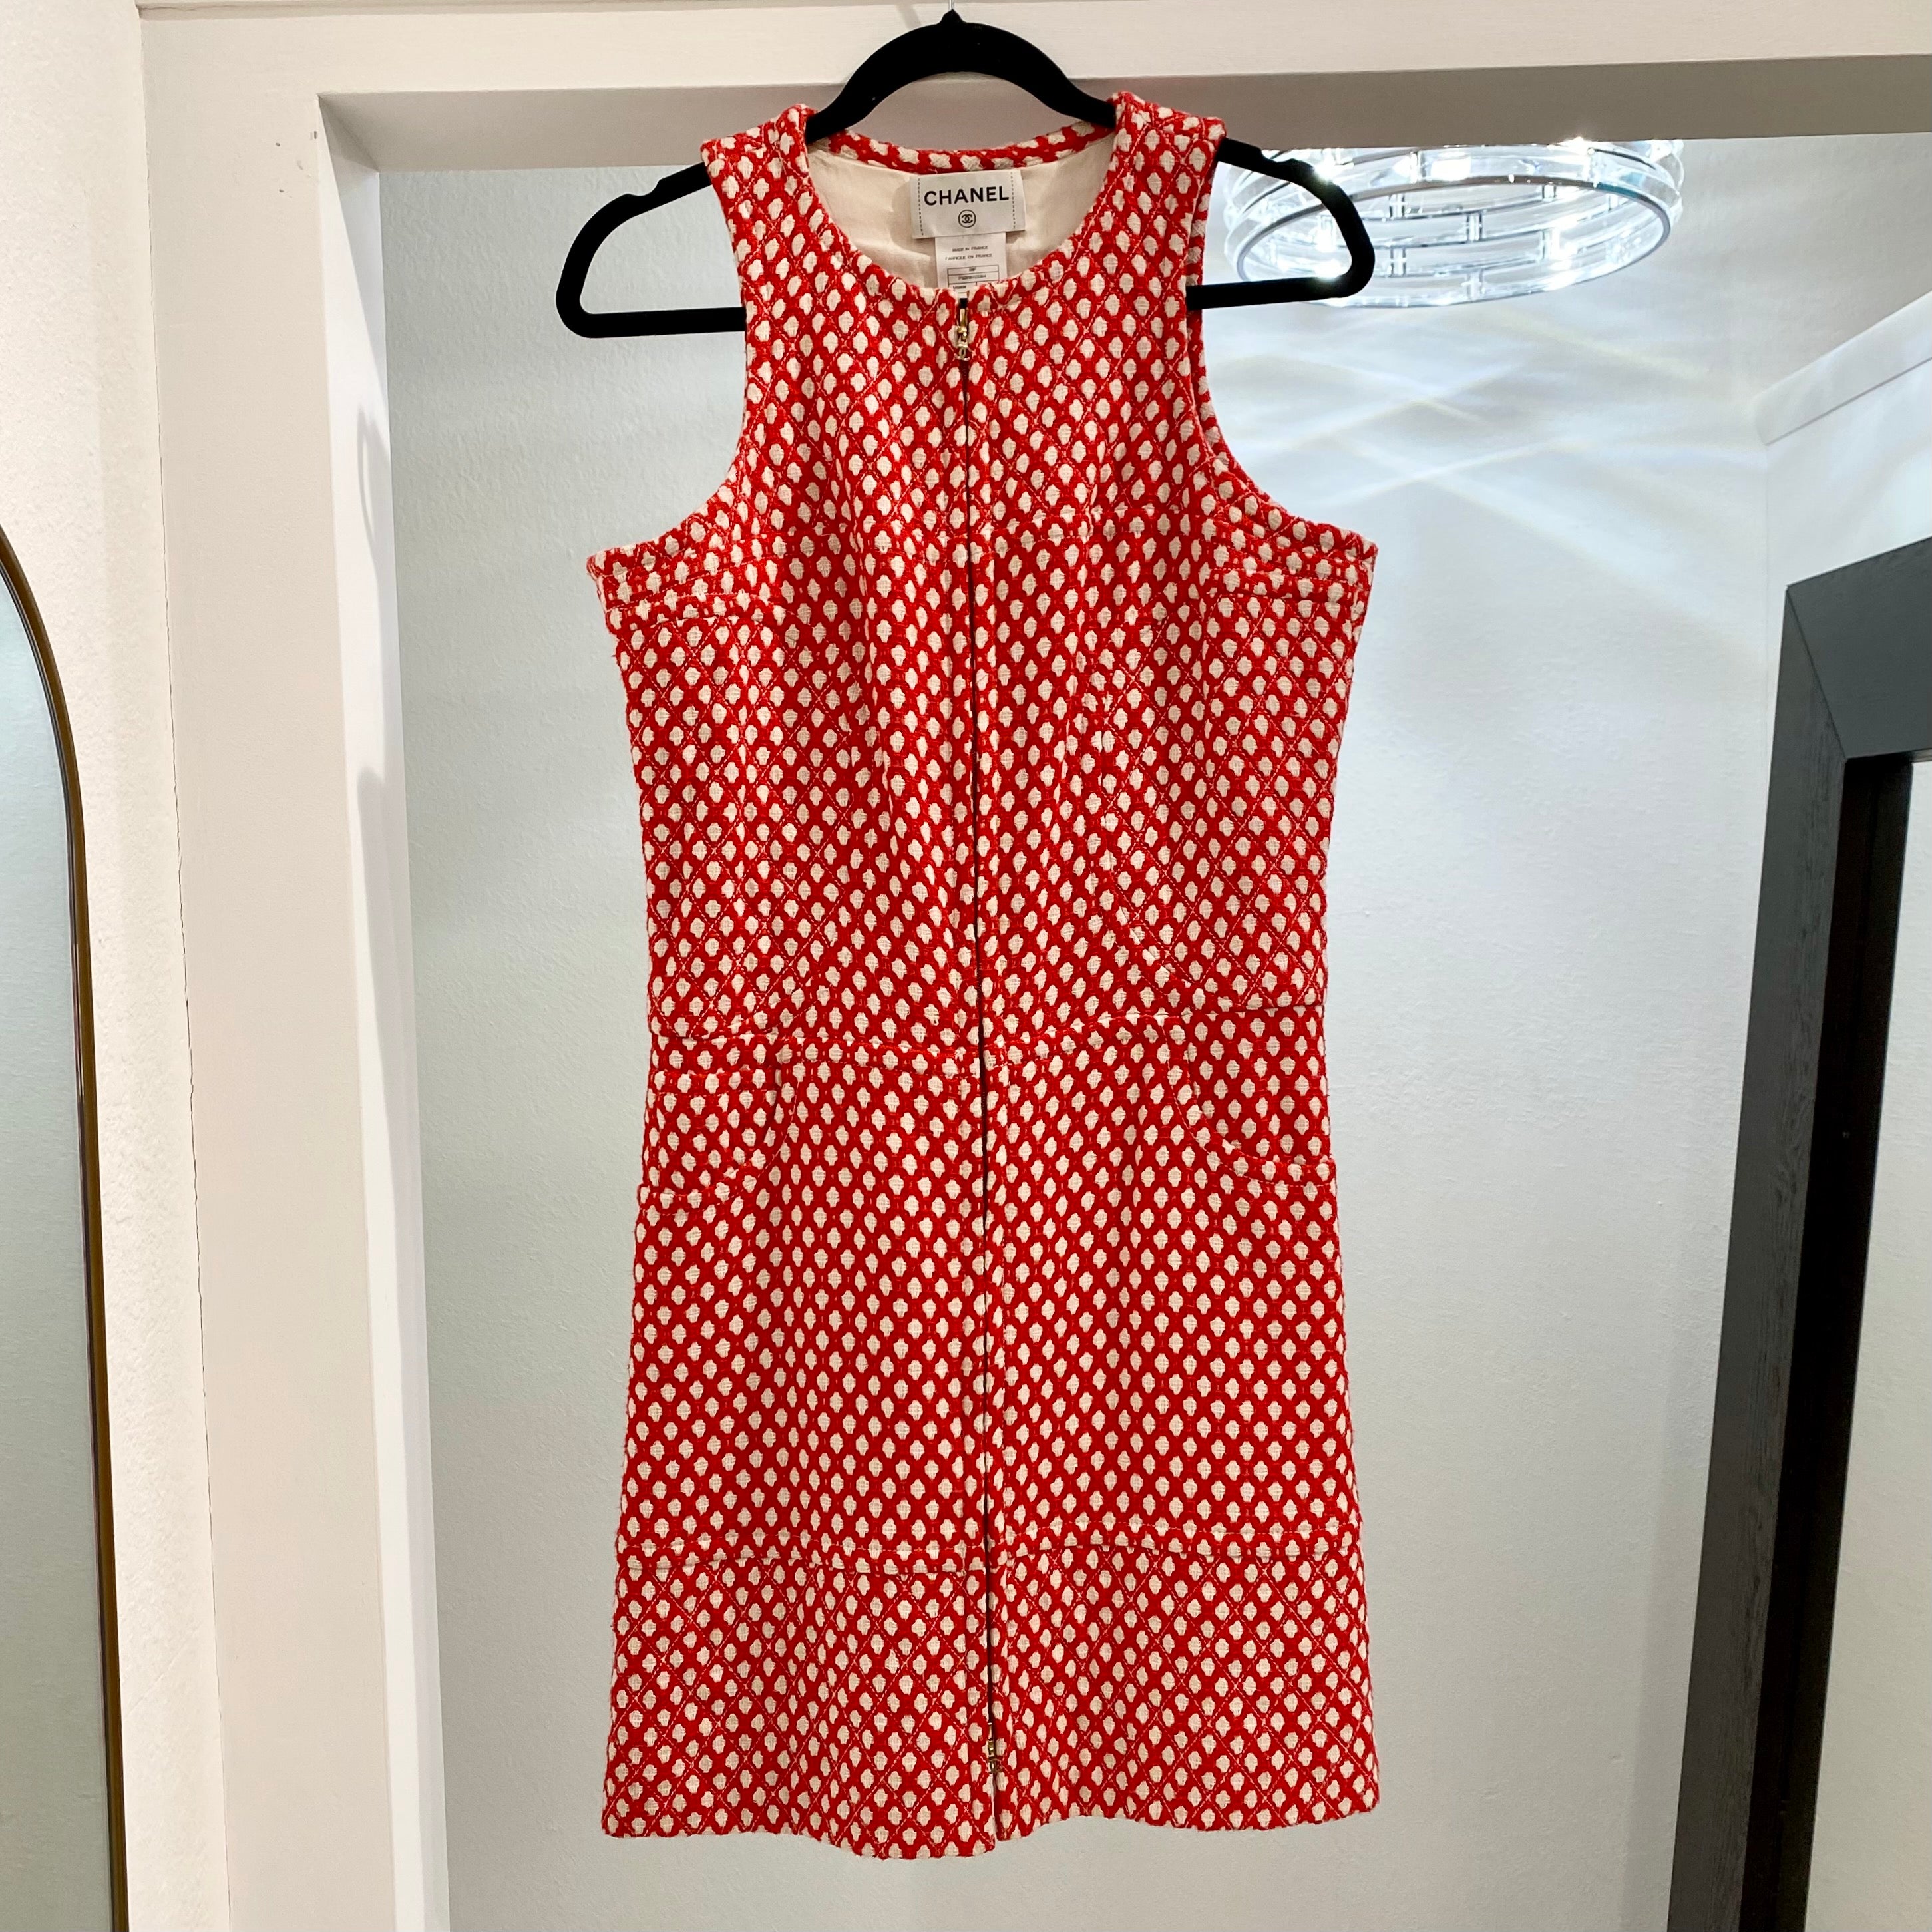 Chanel Black White & Red Tweed Dress sz 2 – Michael's Consignment NYC